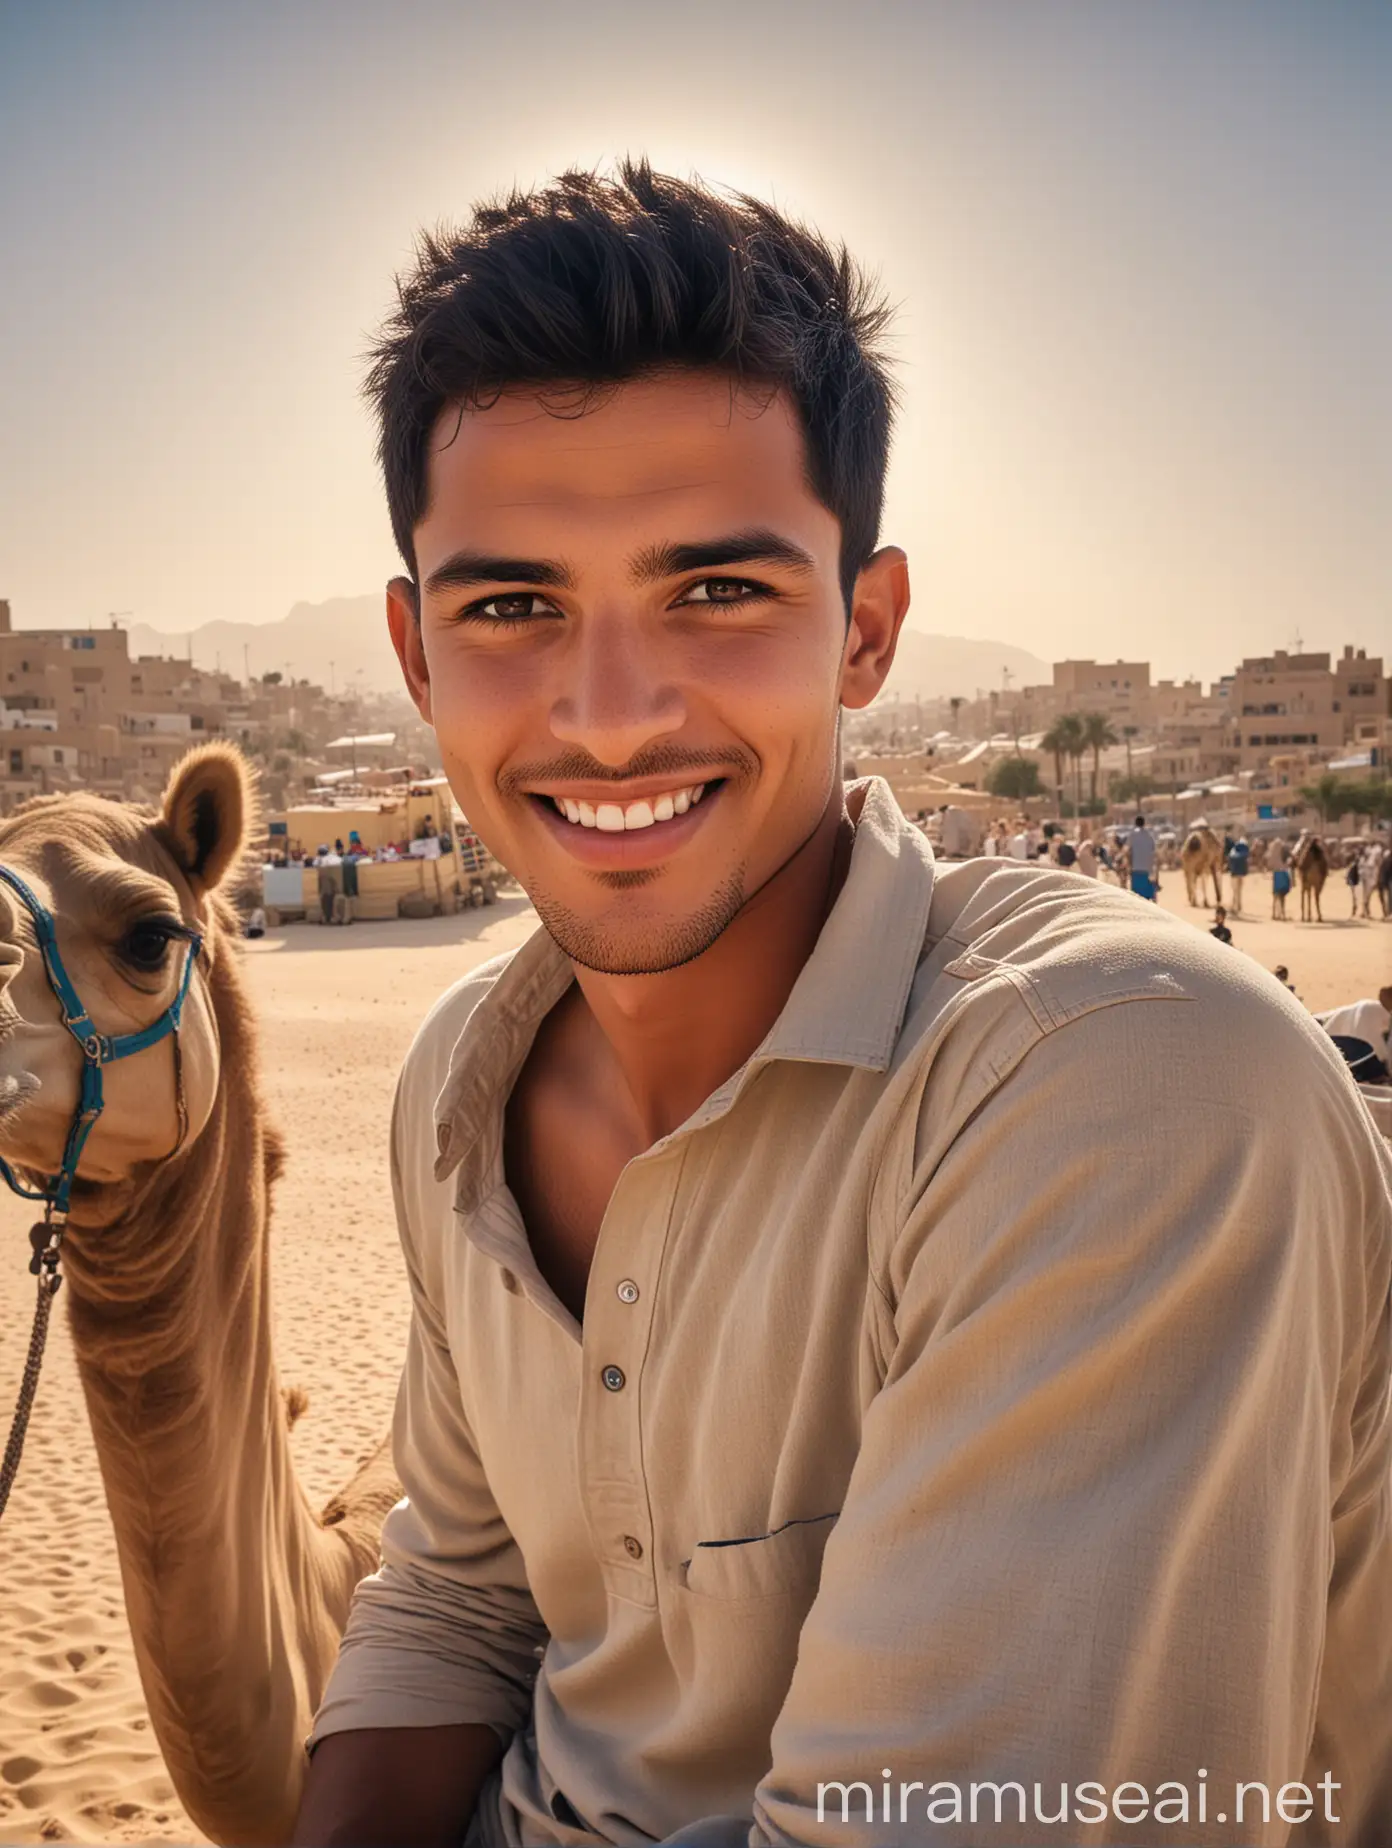 ultra realistic photo of an very handsome man, 20 years old, oval face, short black hair, sitting on a camel the mecca city egypt, hot atmosphere, sweet smiling, photographed using a Samsung Galaxy S23 cellphone with pro camera settings "ISO between 100 to 200 shutter speed 1/100, automatic white balance, ultra realistic.